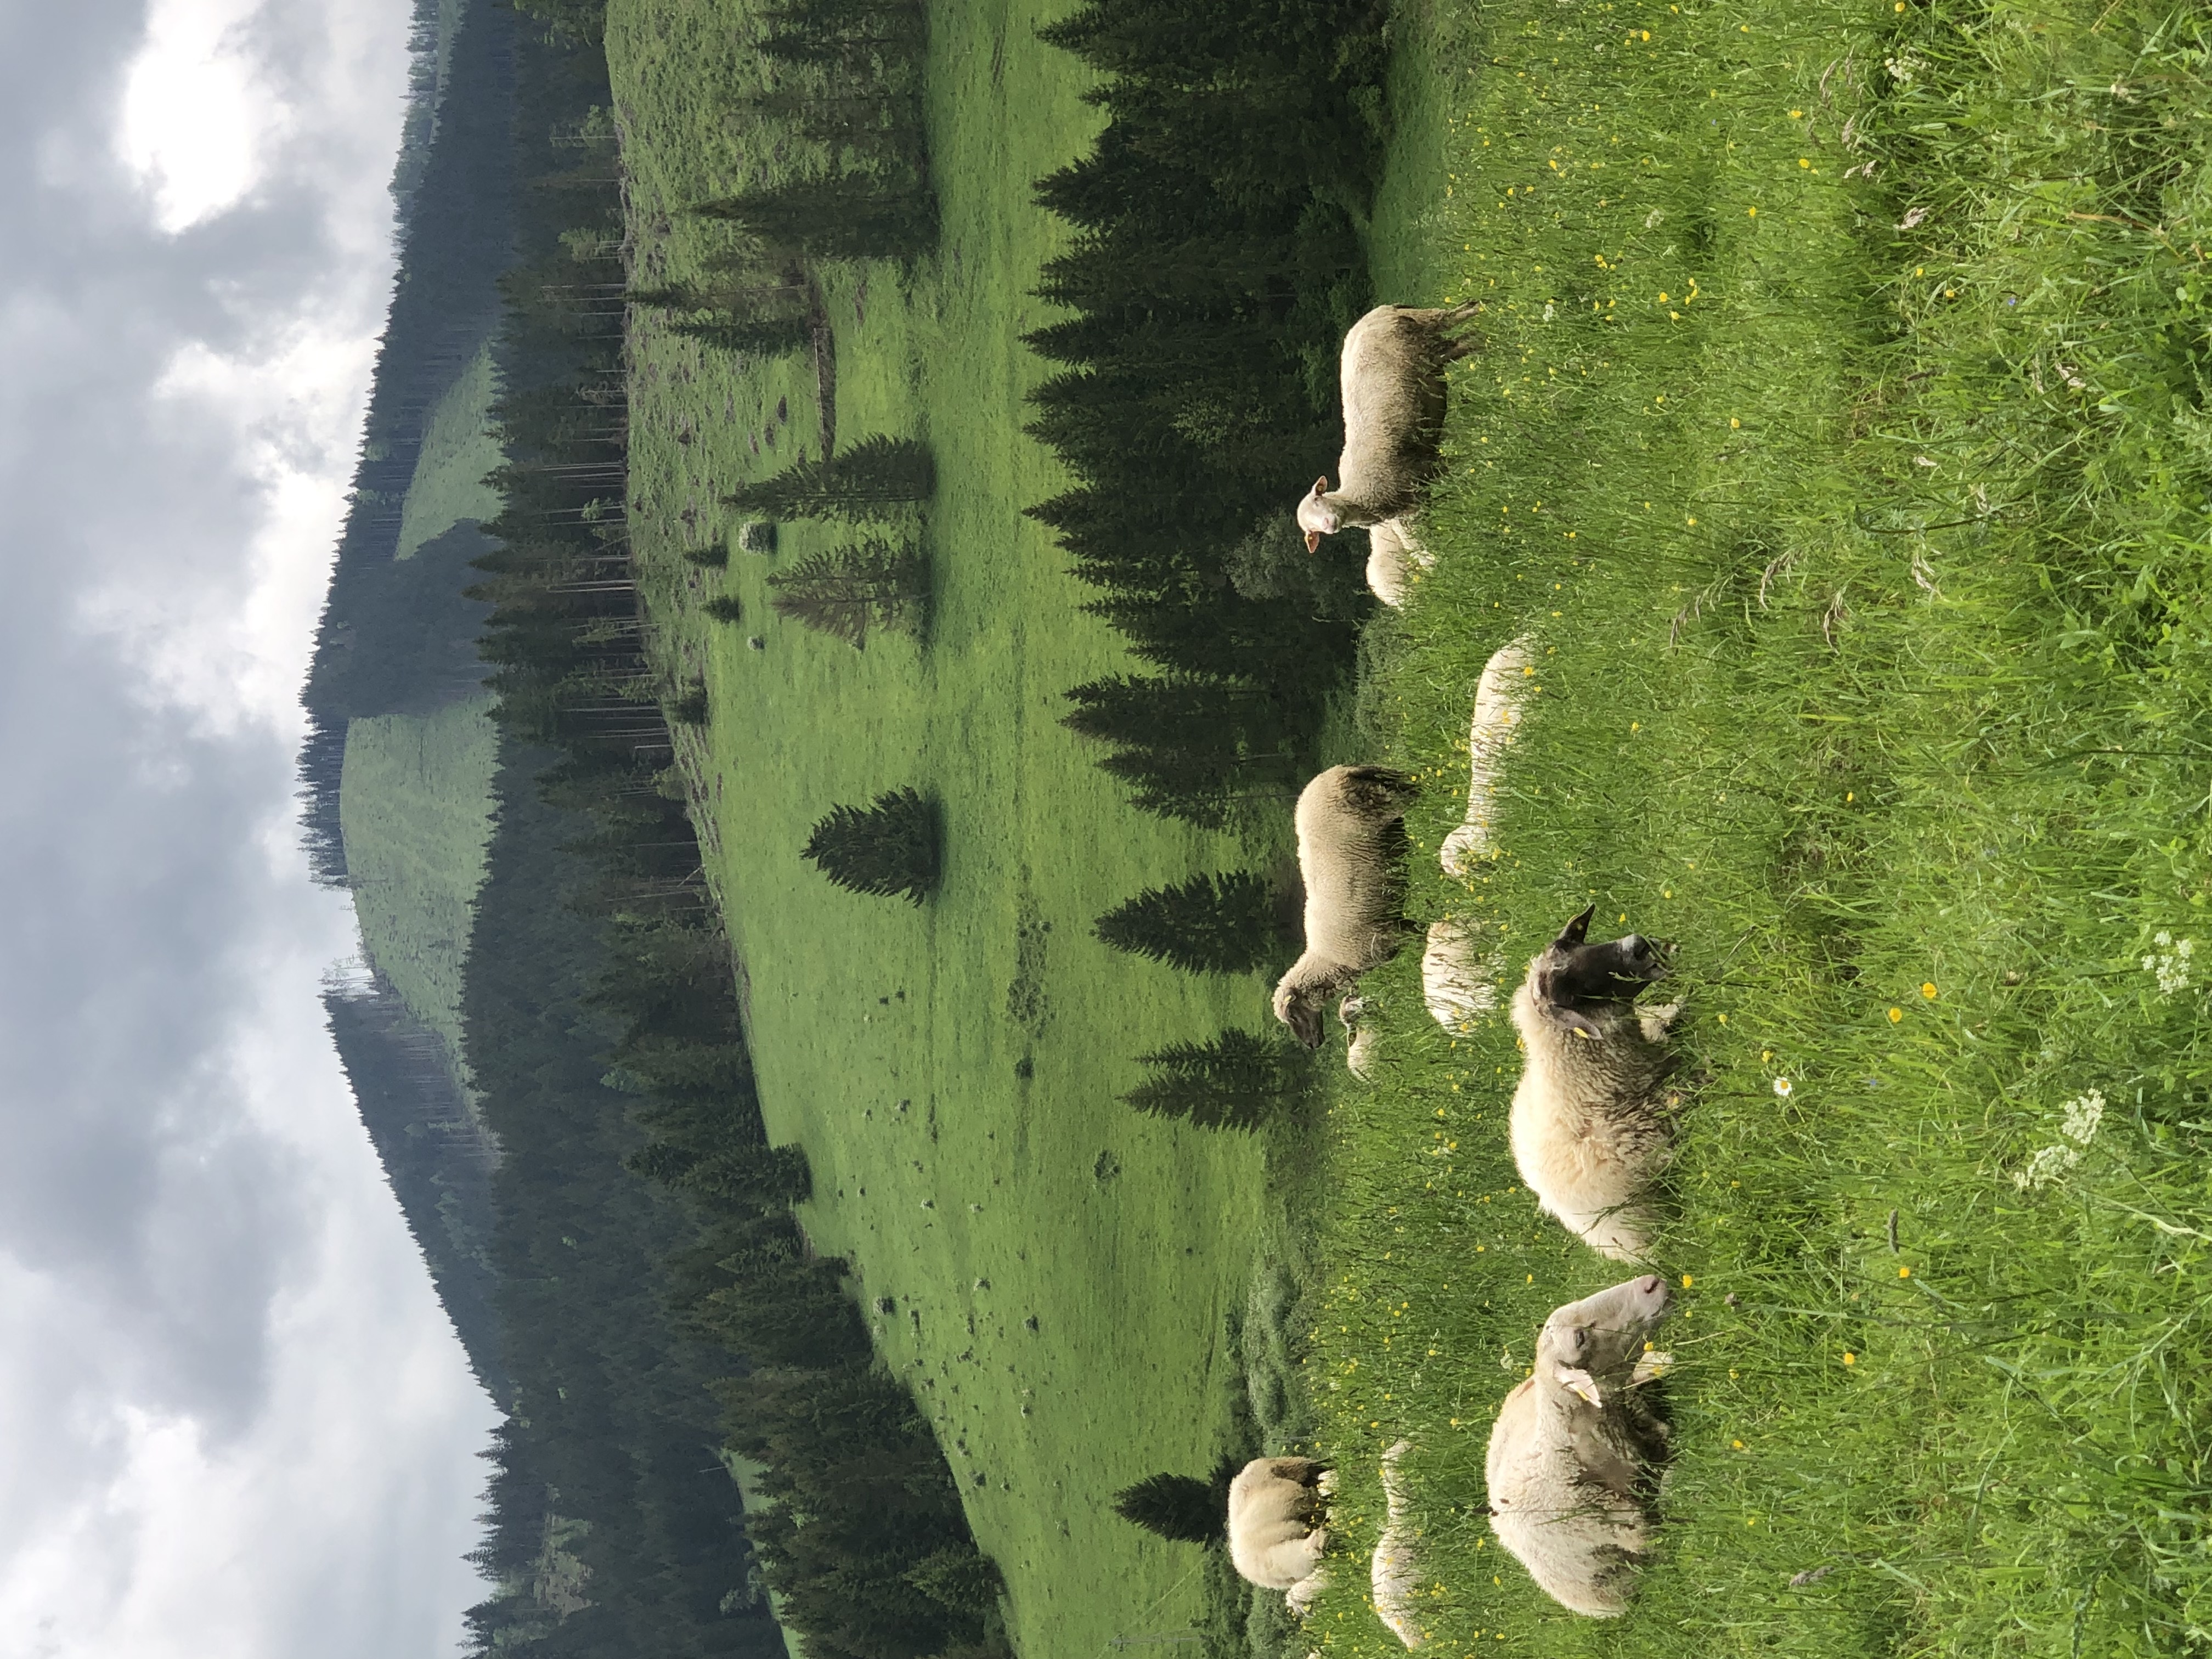 Sheep in a green meadow on a cloudy day